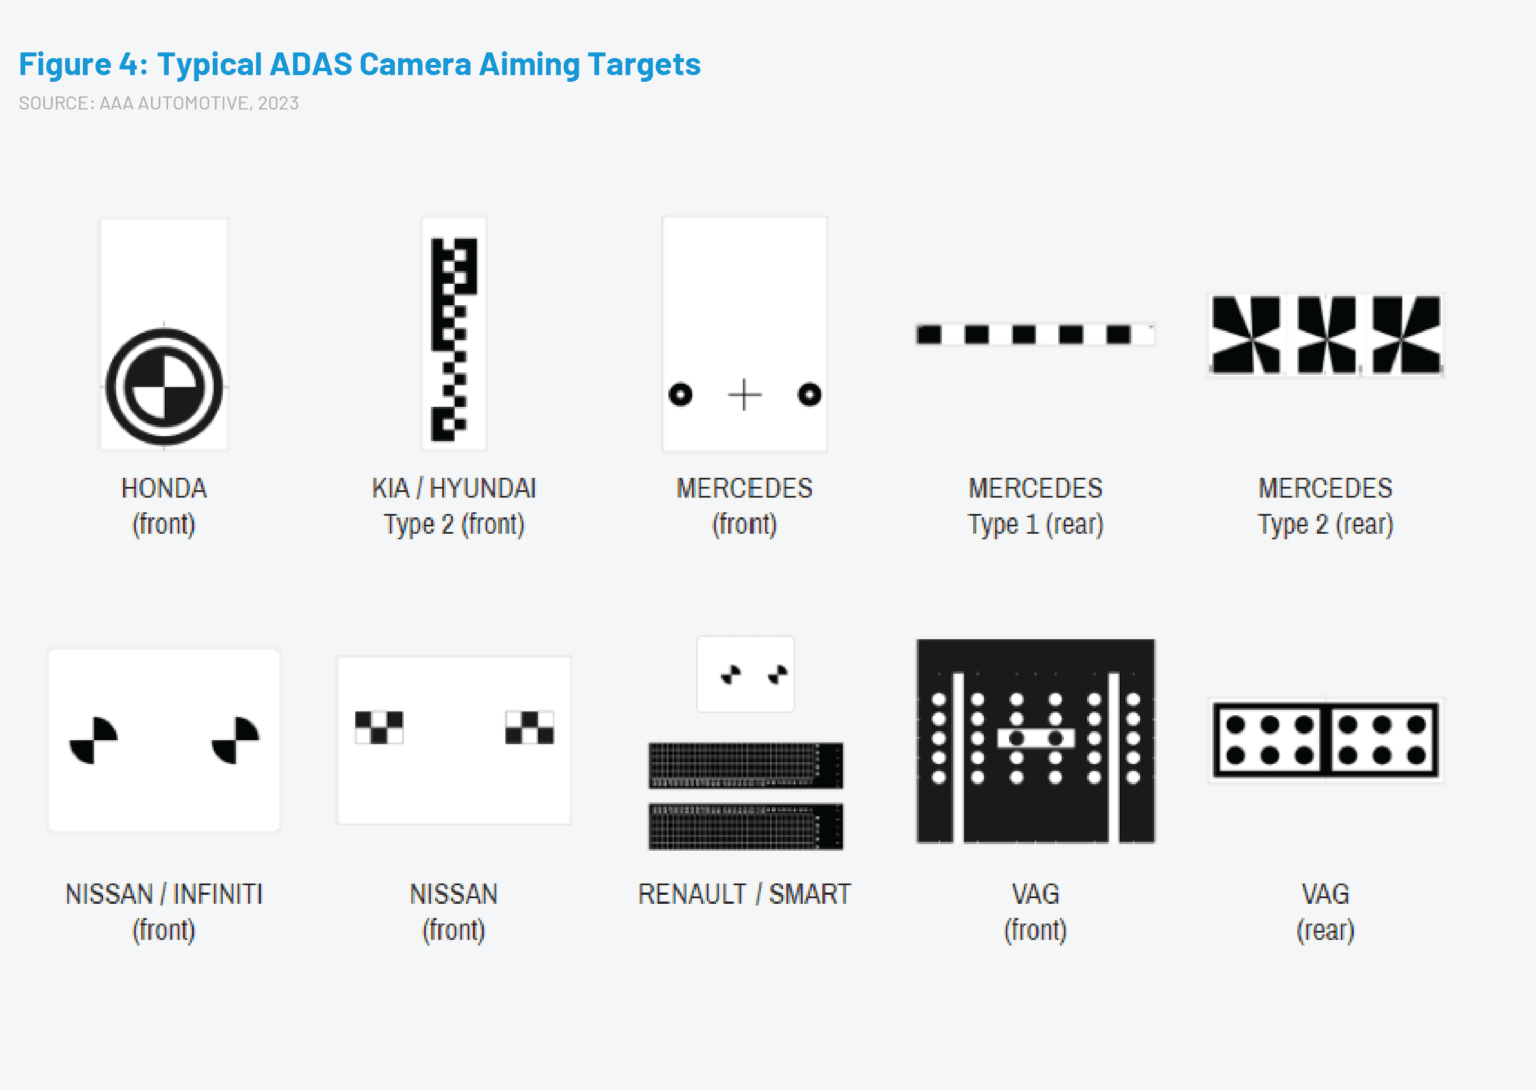 Chart showing typical ADAS camera aiming targets